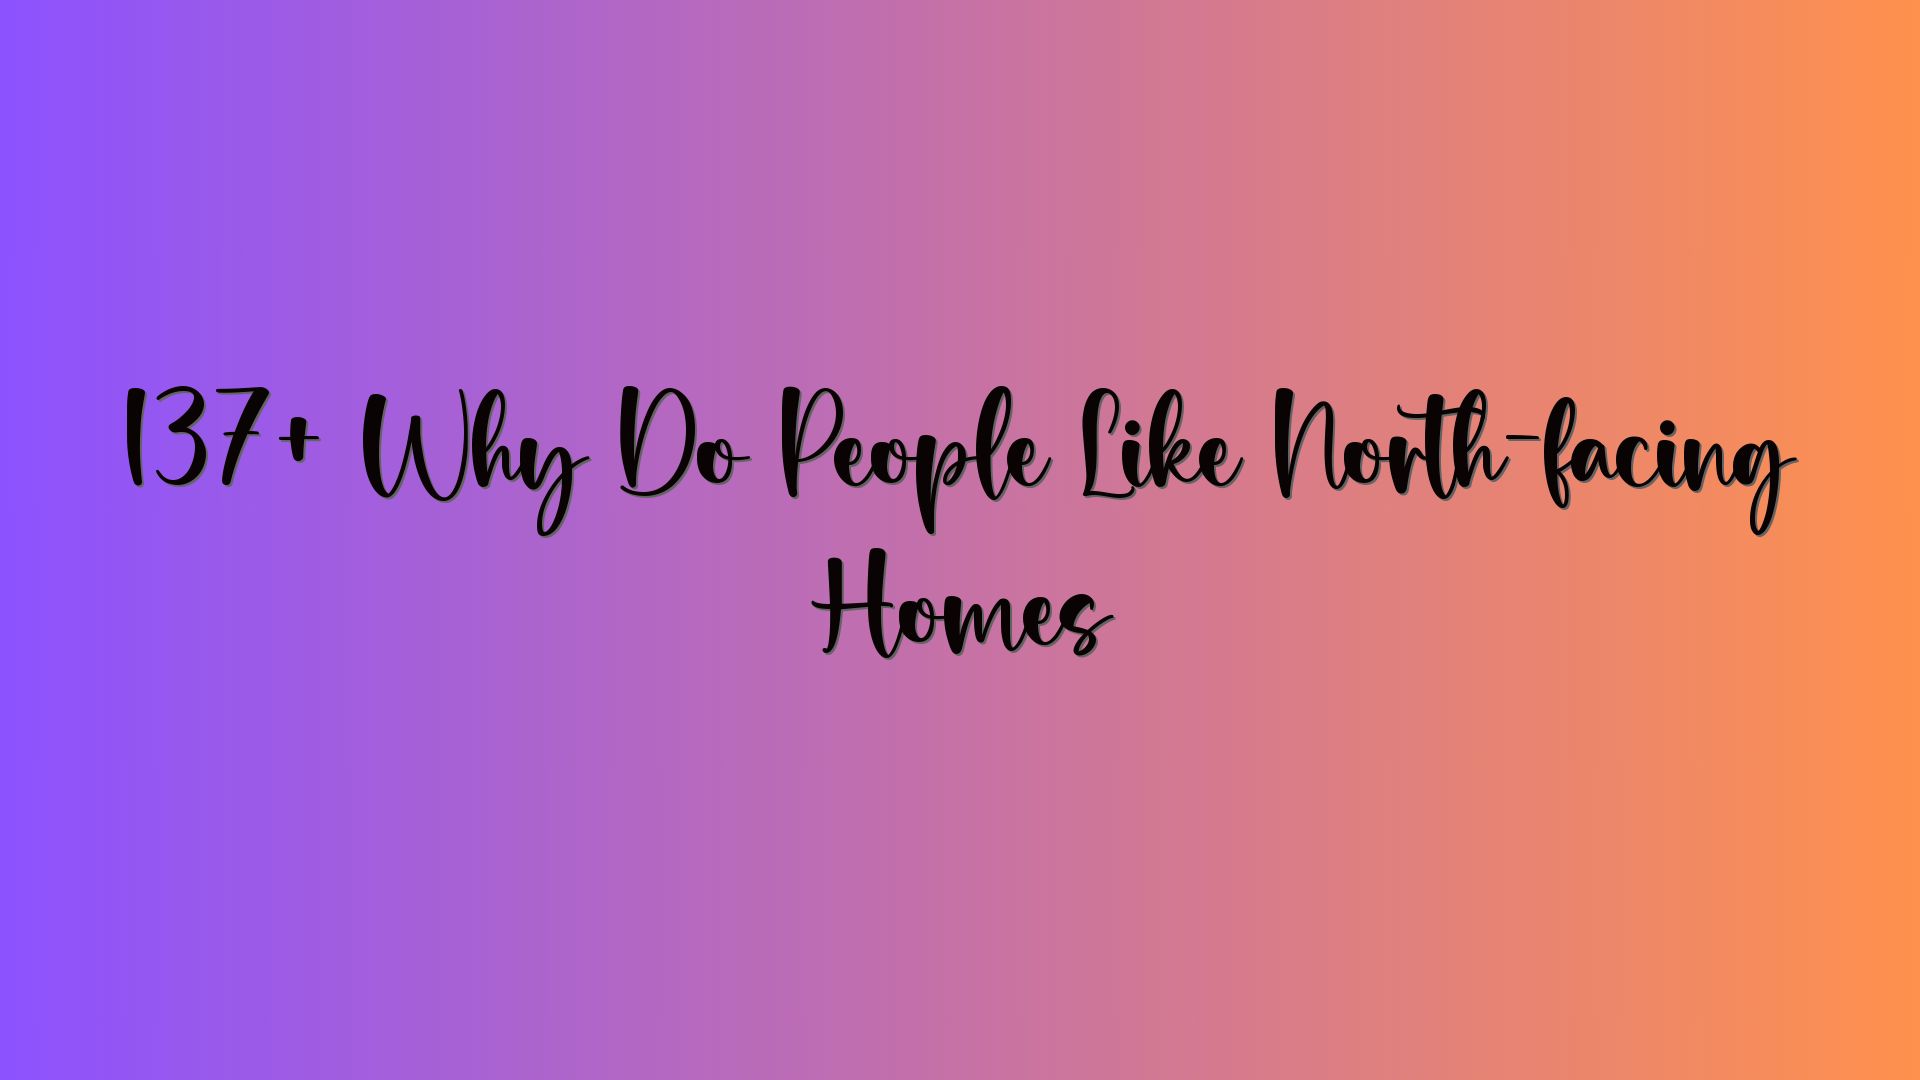 137+ Why Do People Like North-facing Homes